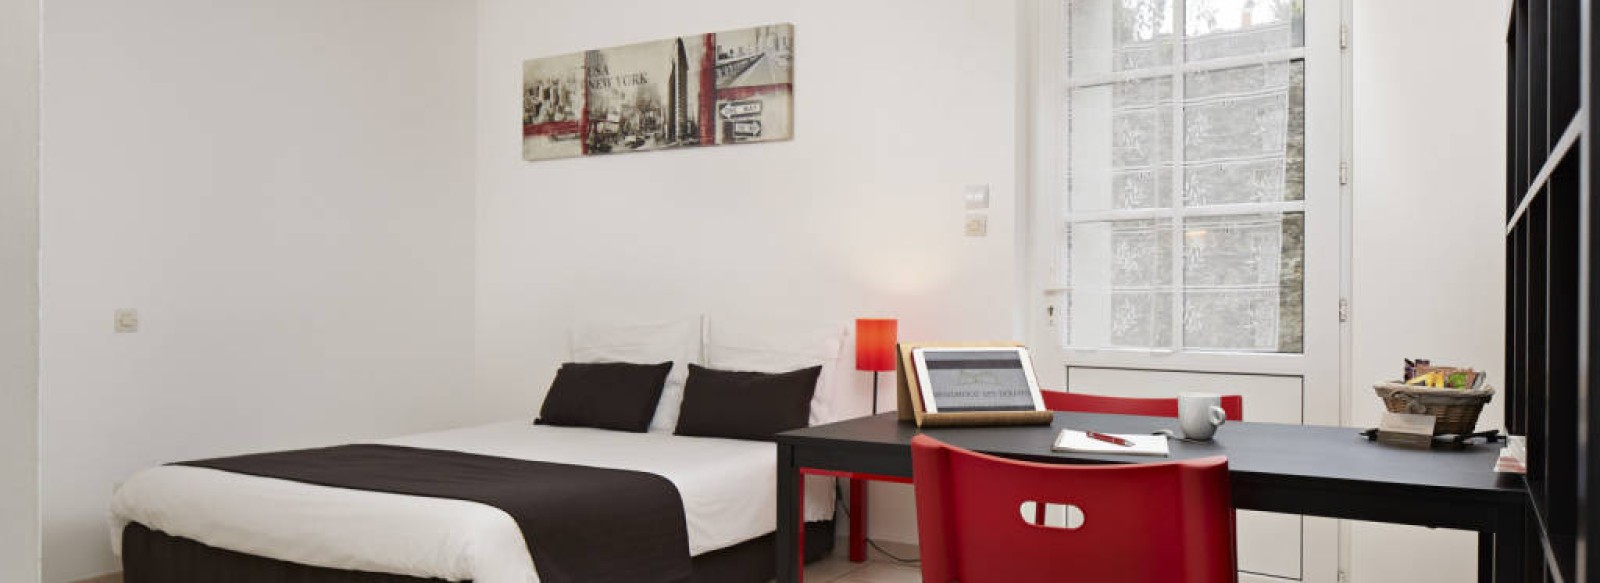 APPART HOTEL - RESIDENCE LES DOUVES